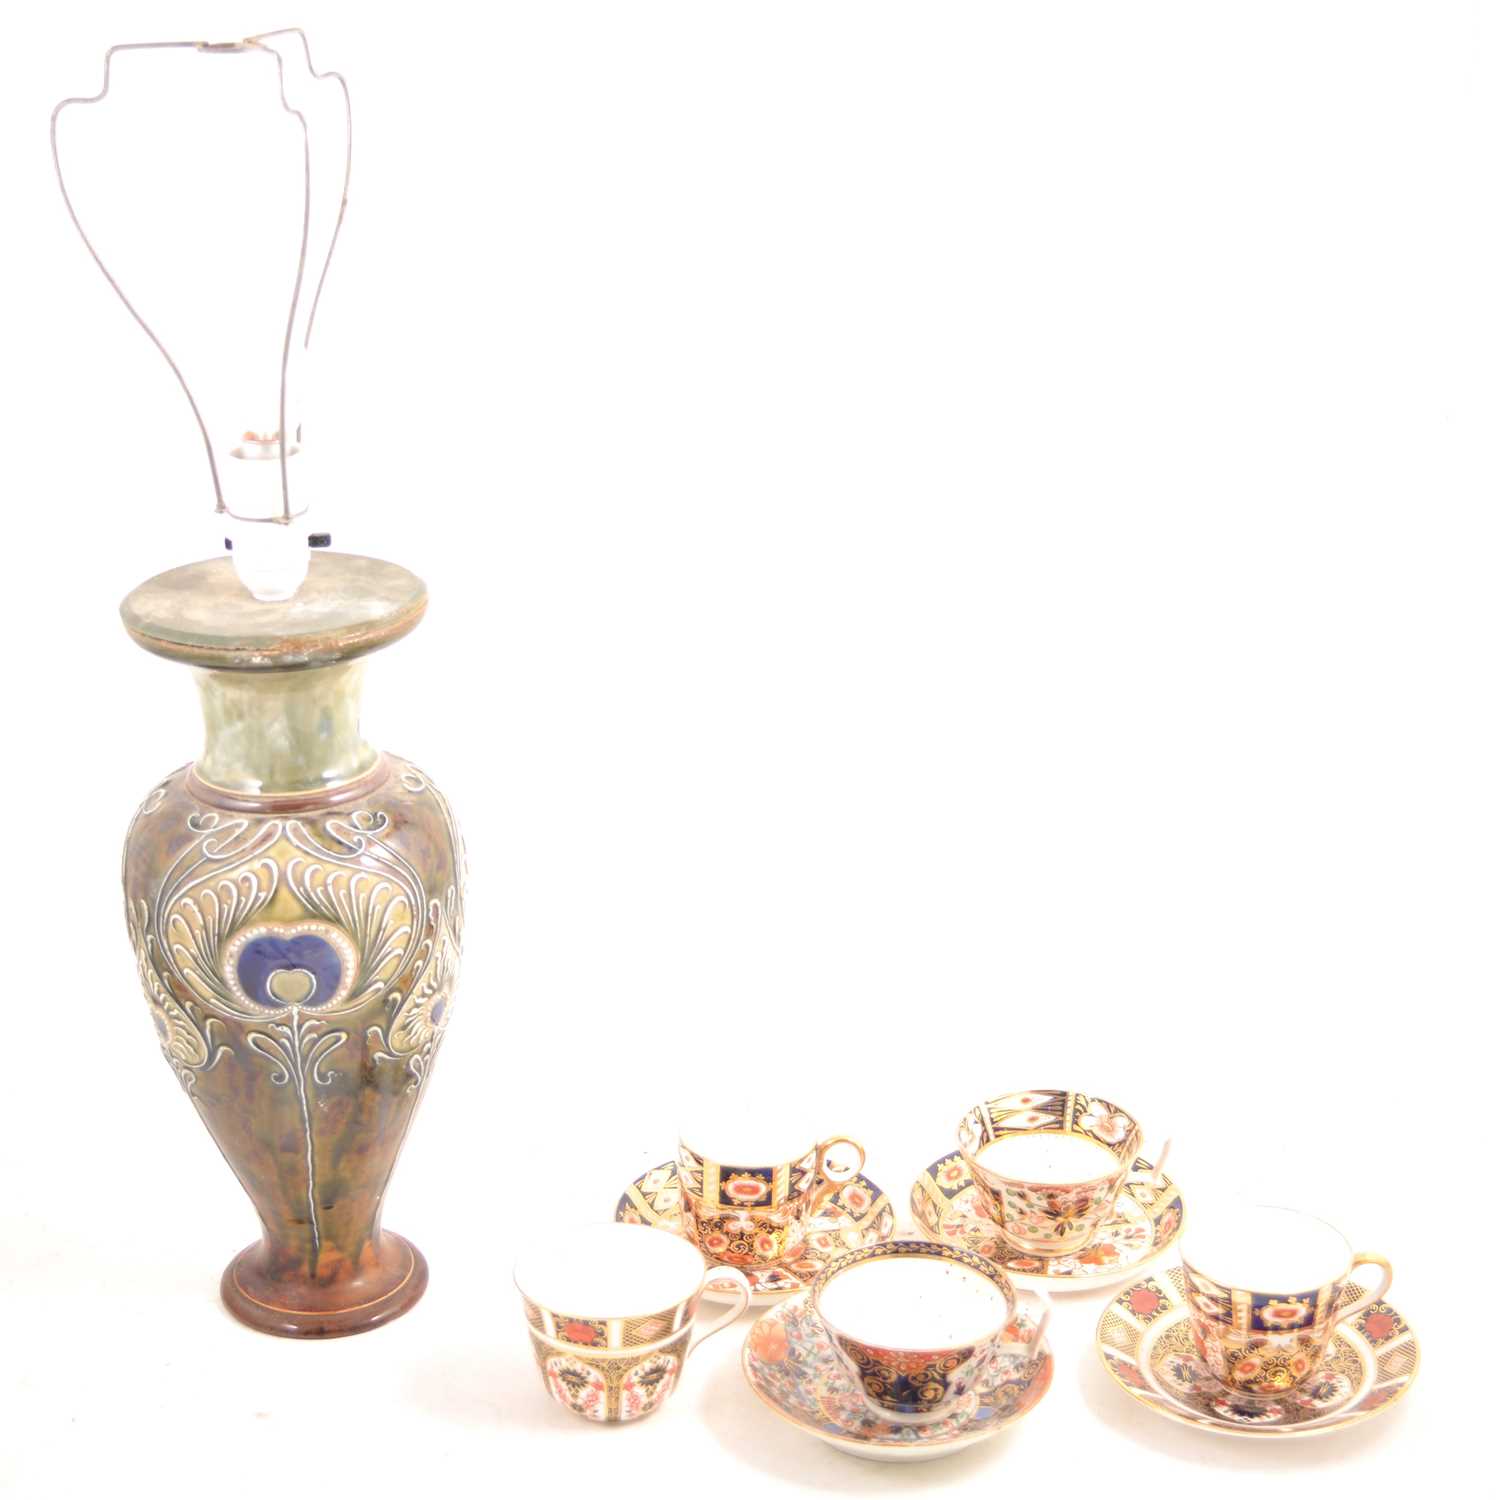 Lot 22 - A collection of Imari ware, and a Royal Doulton vase converted to a lamp base.